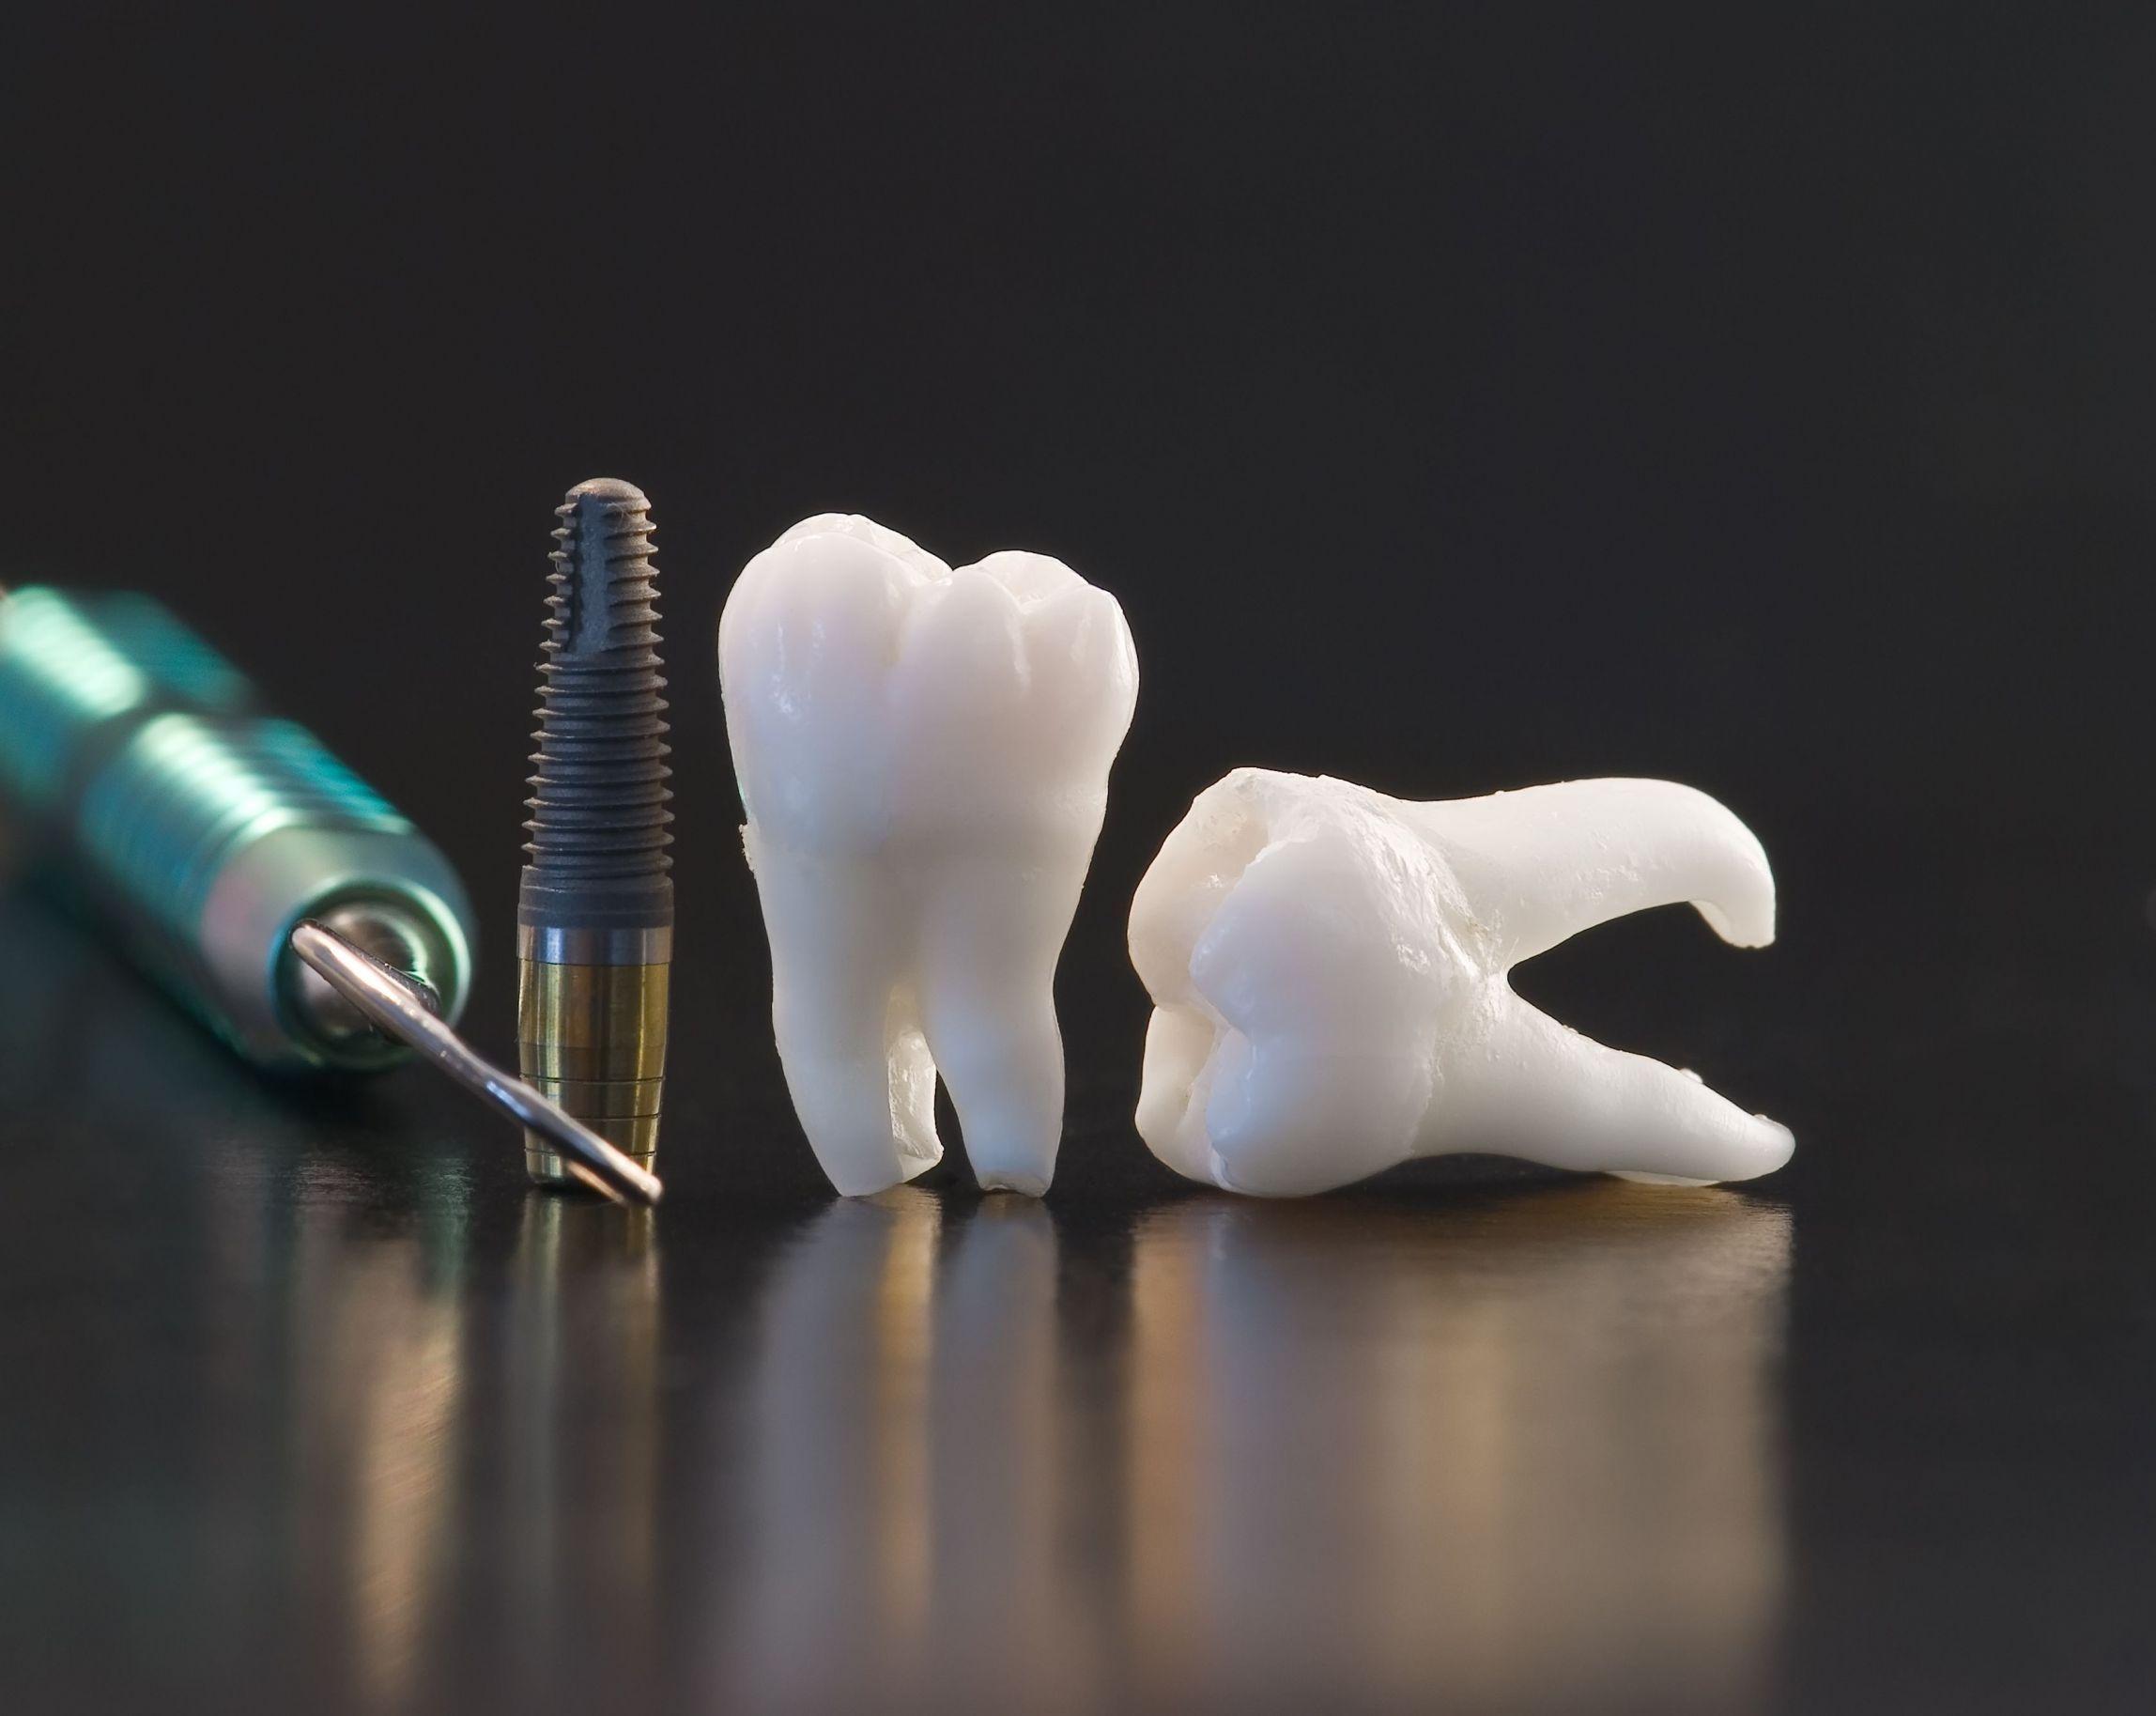 A tooth and dental implant are shown - Dentist